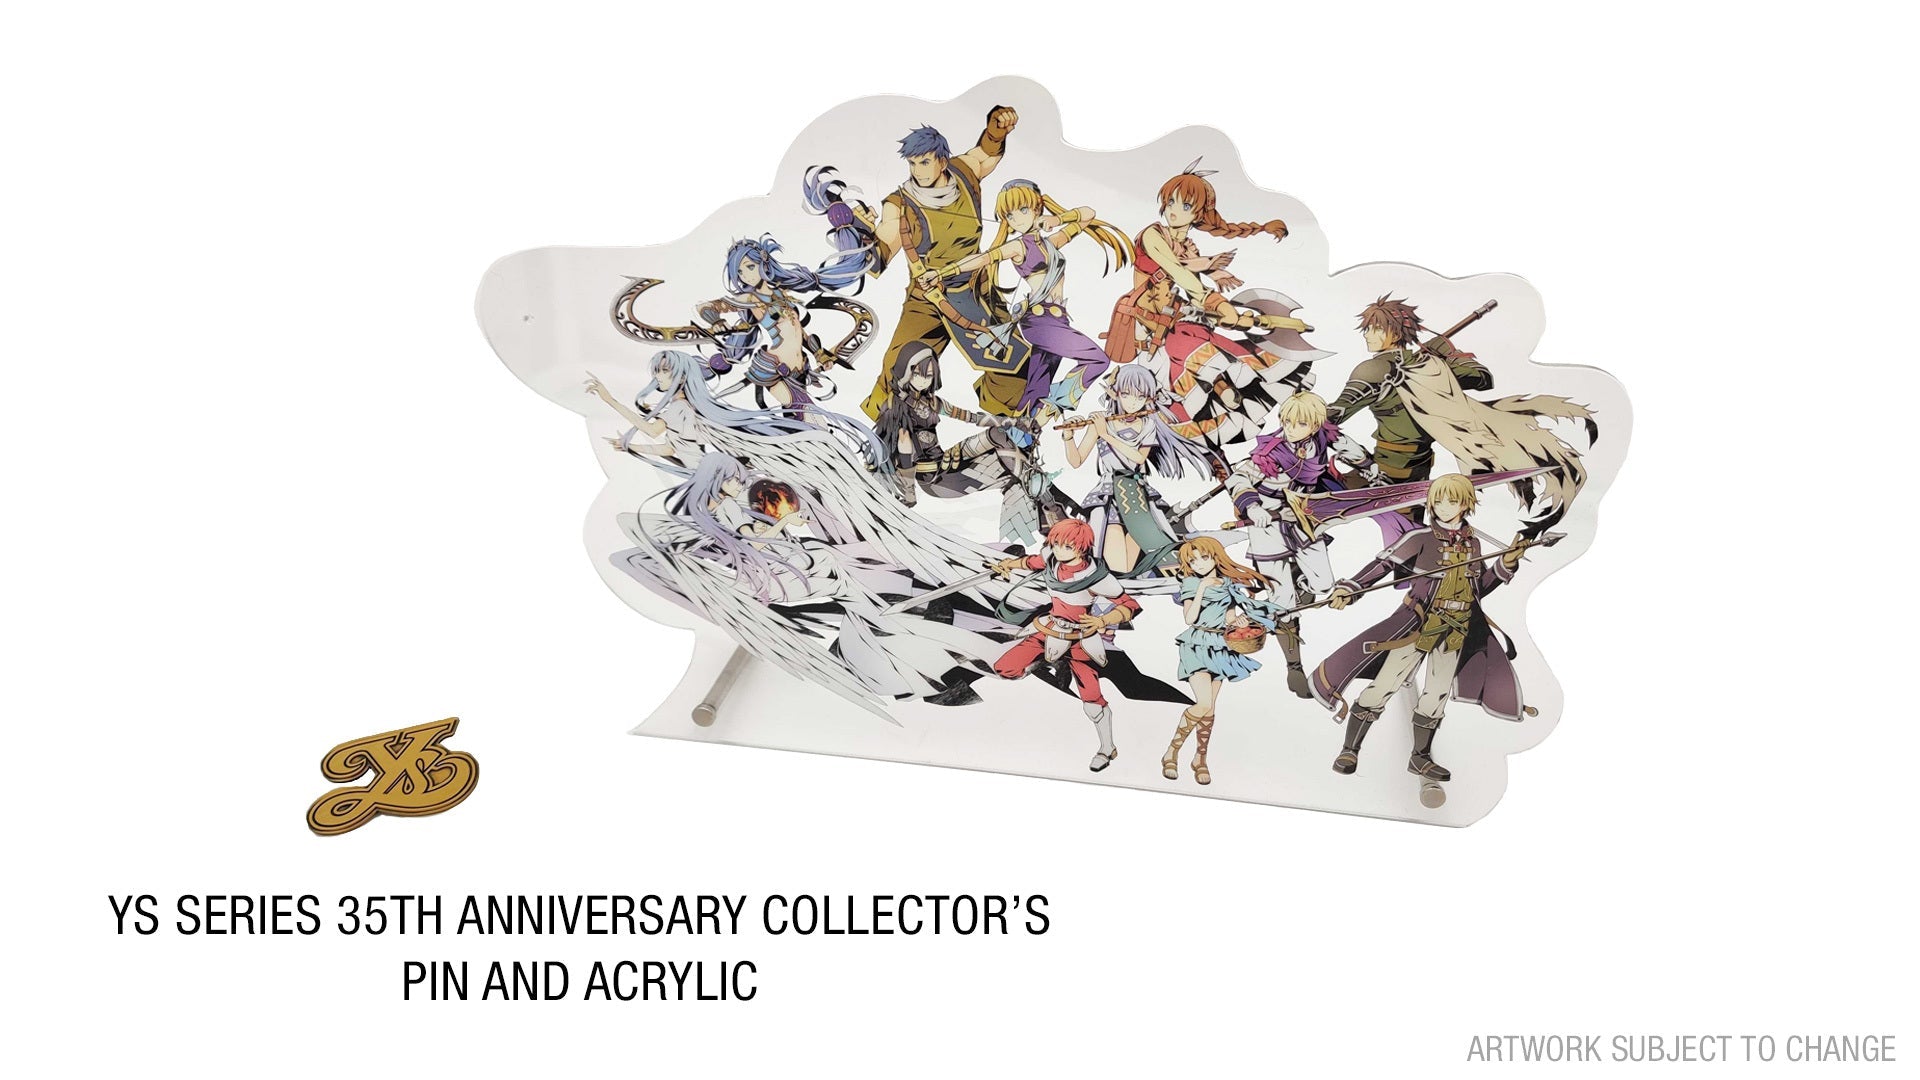 Ys Series 35th Anniversary Collector’s Pin and Acrylic